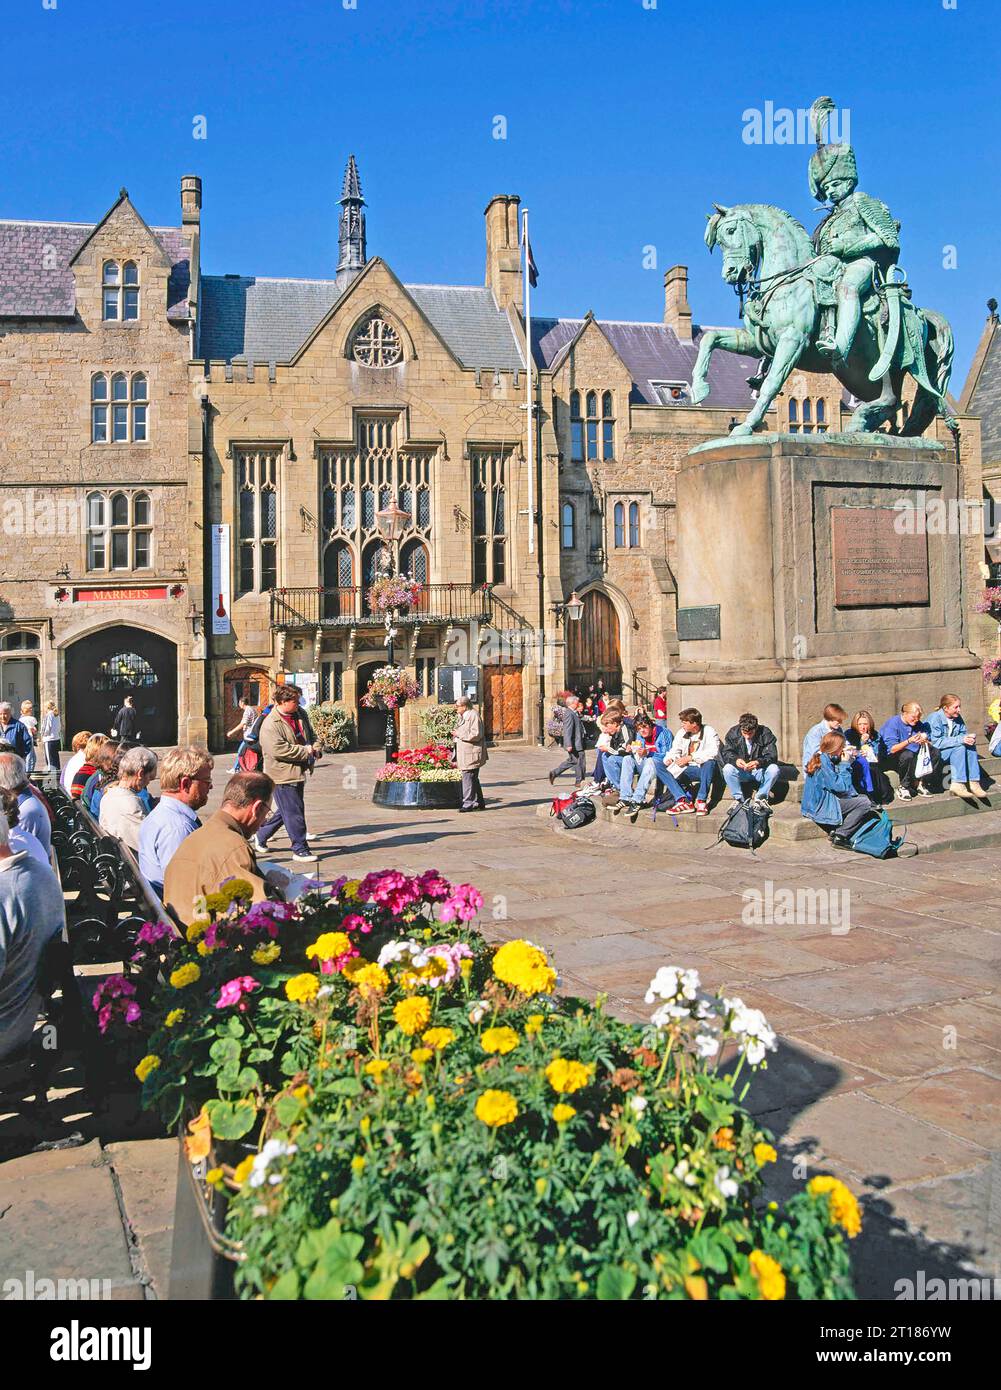 Historical 1997 archive image of the twice lifesize equestrian statue of Charles William Vane Stewart Third Marquis of Londonderry in its original placement in the Market Place in Durham where it turned green as a result of the electroplated copper covering. Repaired in 1951 then renovated in 2009 - 10, after which it was moved 16 metres south of its original position and is now (in 2022) coloured black and still in the Market Place County Durham Stock Photo